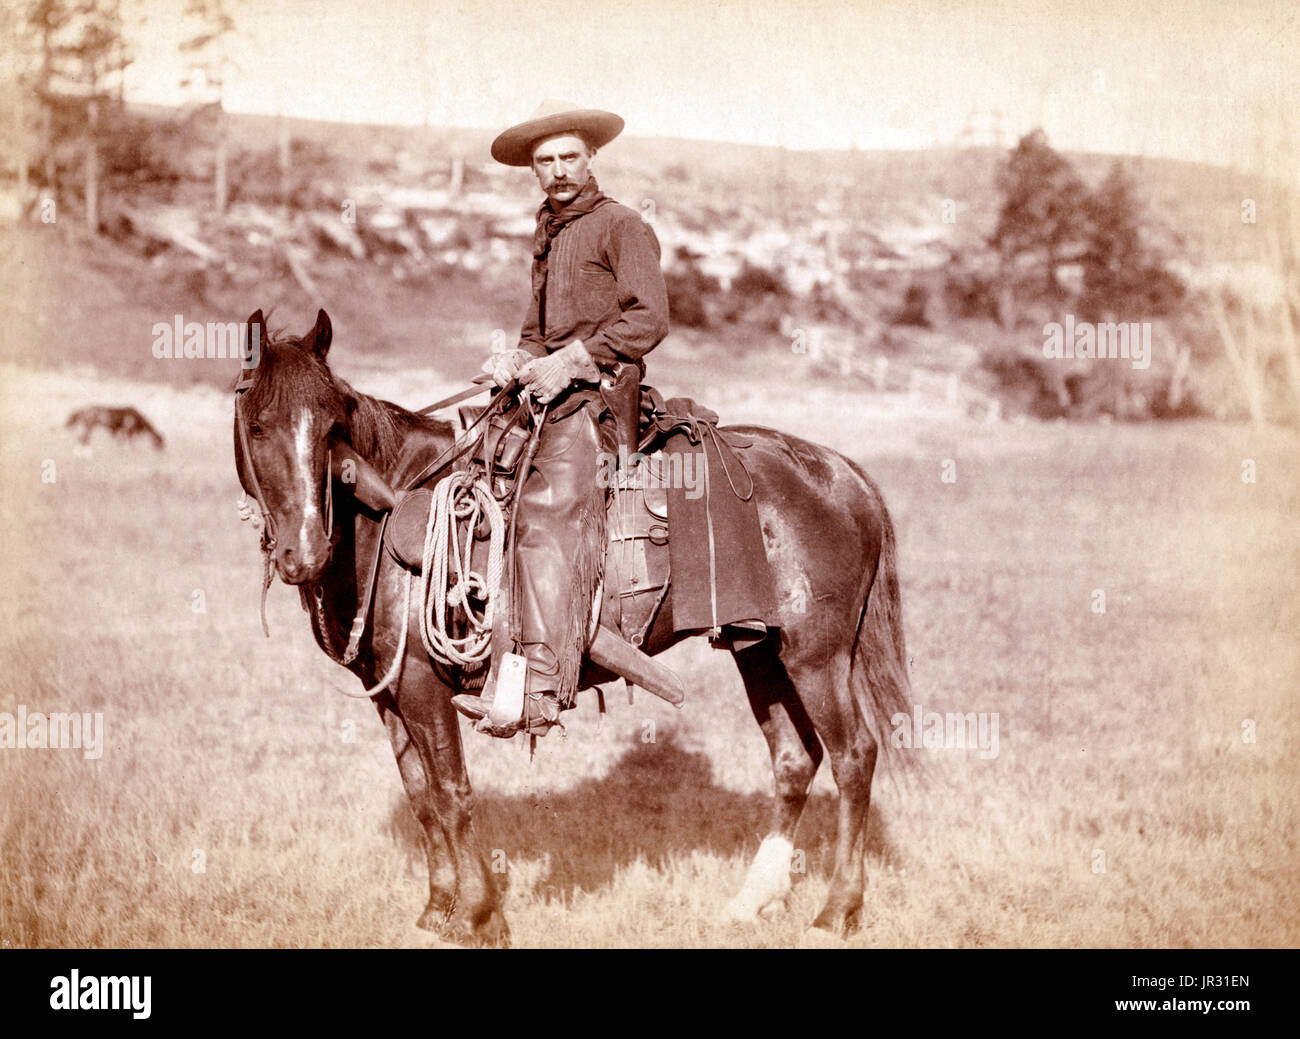 The historic American cowboy of the late 19th century arose from the vaquero traditions of northern Mexico and became a figure of special significance and legend. By the late 1860s, following the American Civil War and the expansion of the cattle industry, former soldiers from both the Union and Confederacy came west, seeking work, as did large numbers of restless white men in general. A significant number of African-American freedmen also were drawn to cowboy life, in part because there was not quite as much discrimination in the west as in other areas of American society at the time. The ave Stock Photo